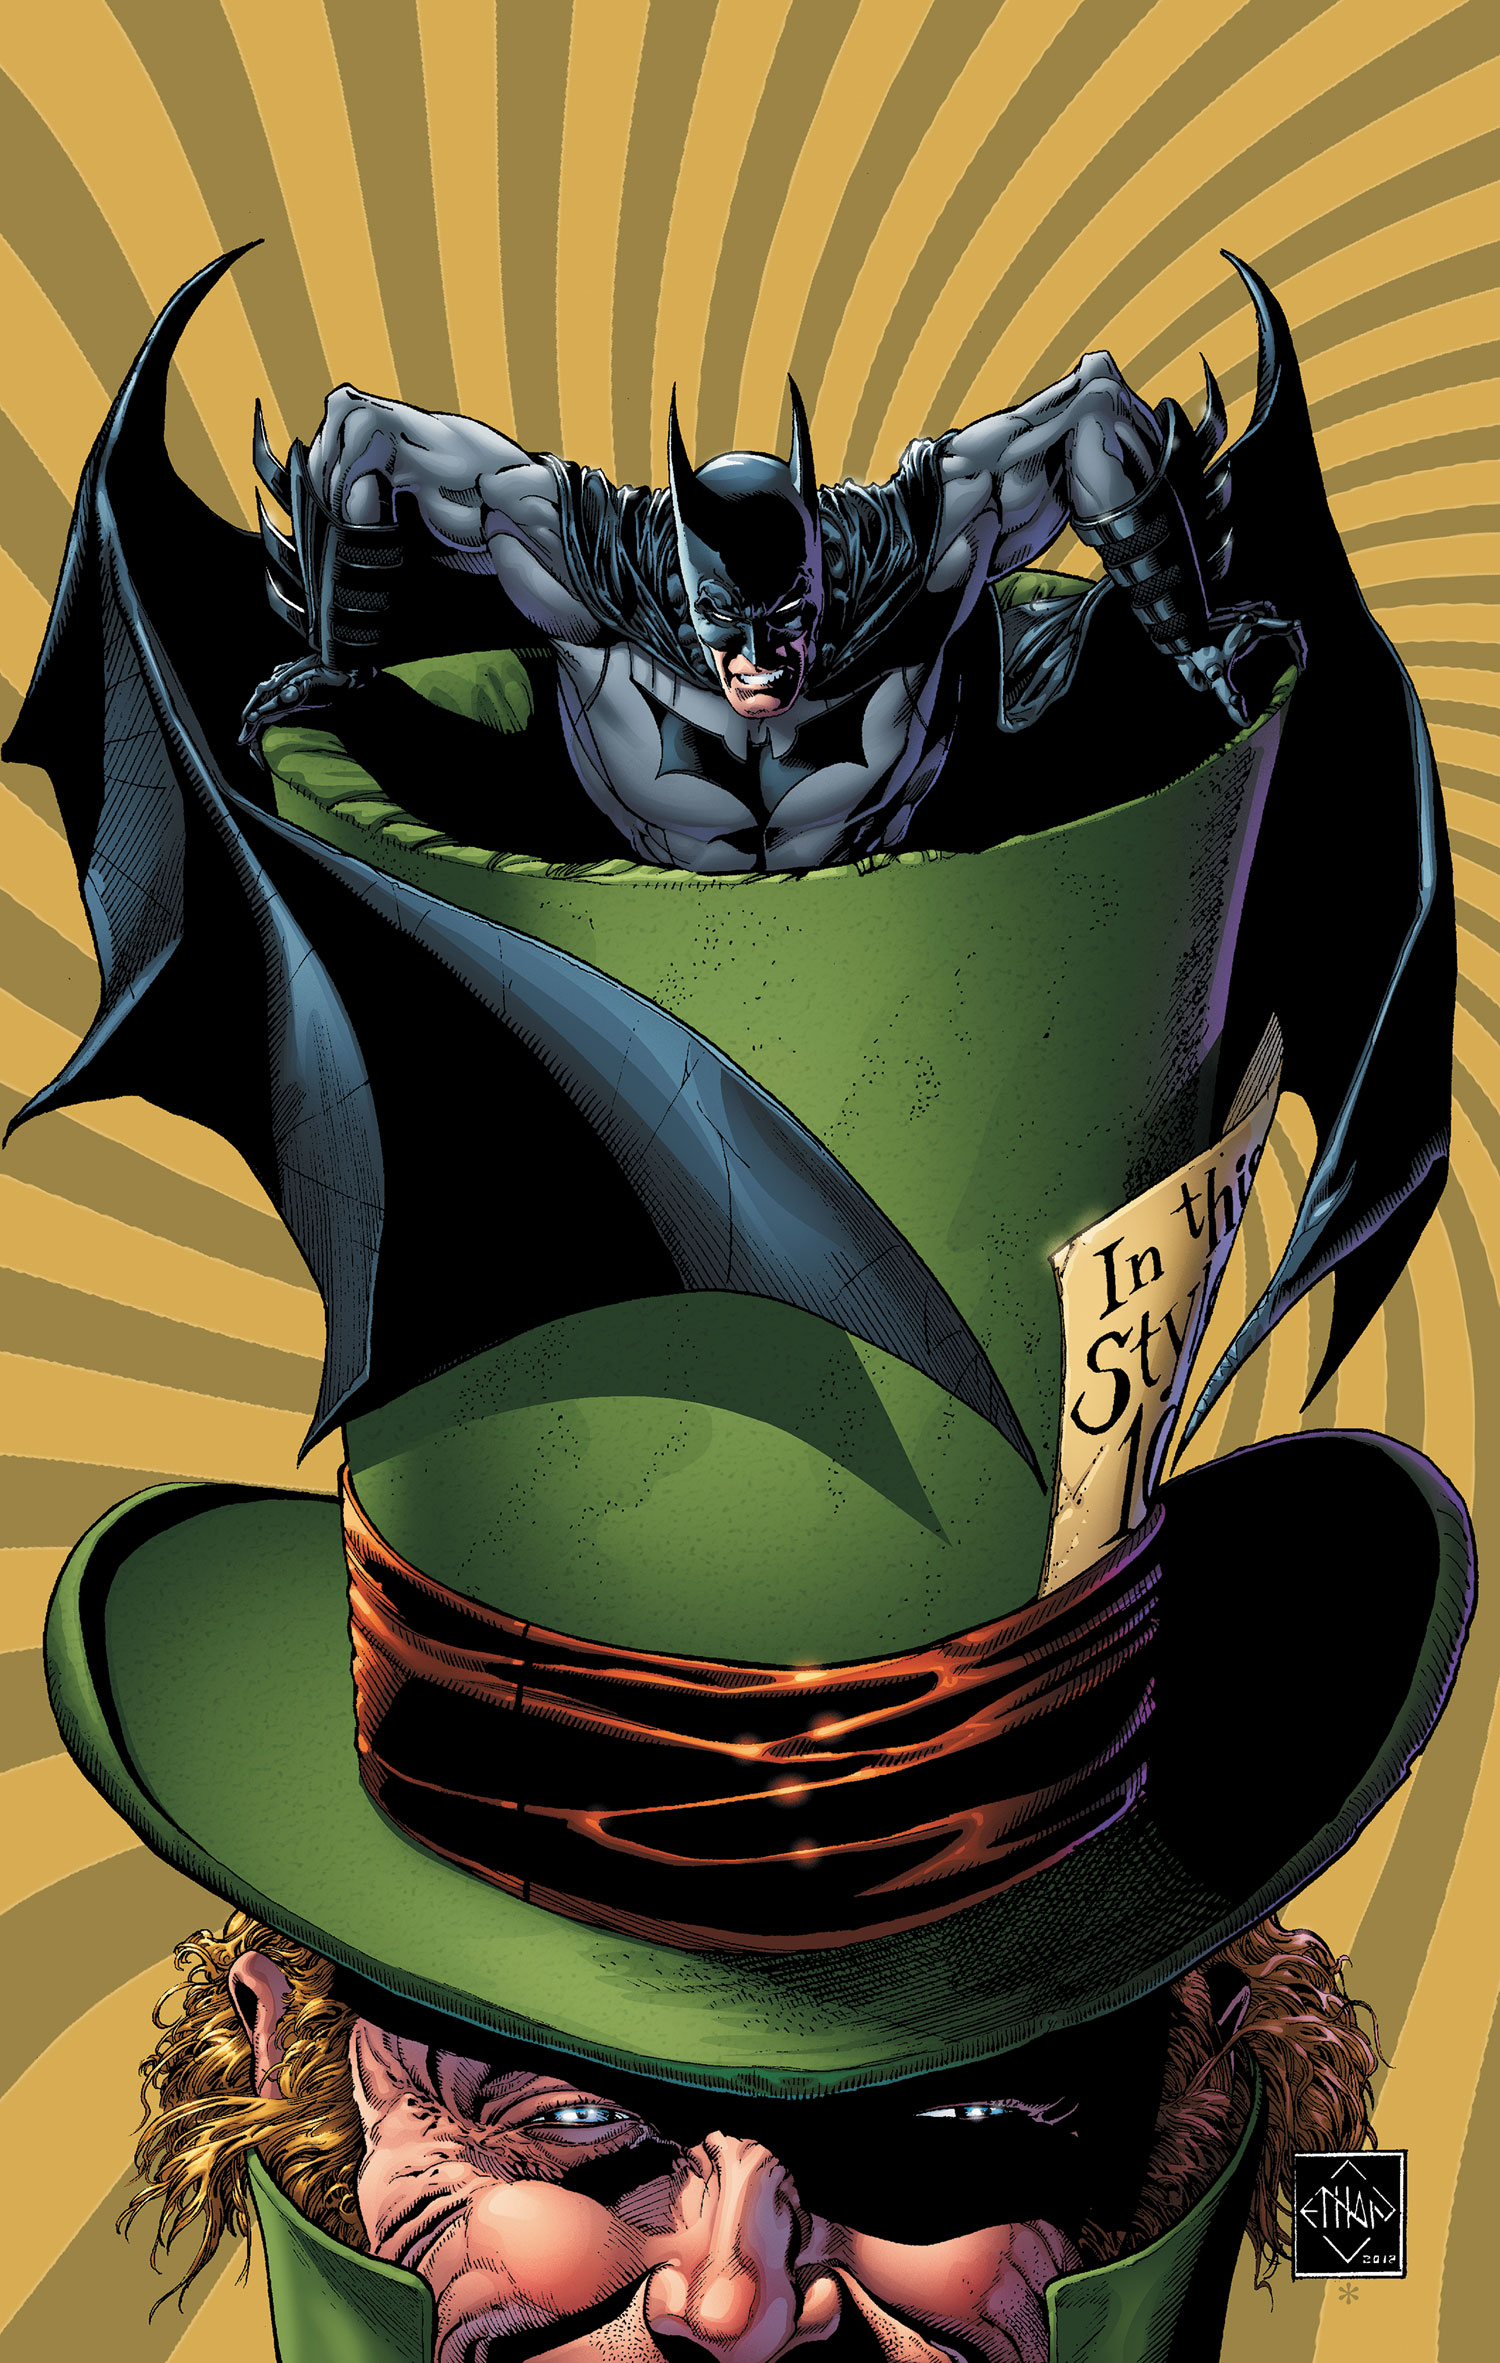 Batman: The Dark Knight #16: Cover by ETHAN VAN SCIVER